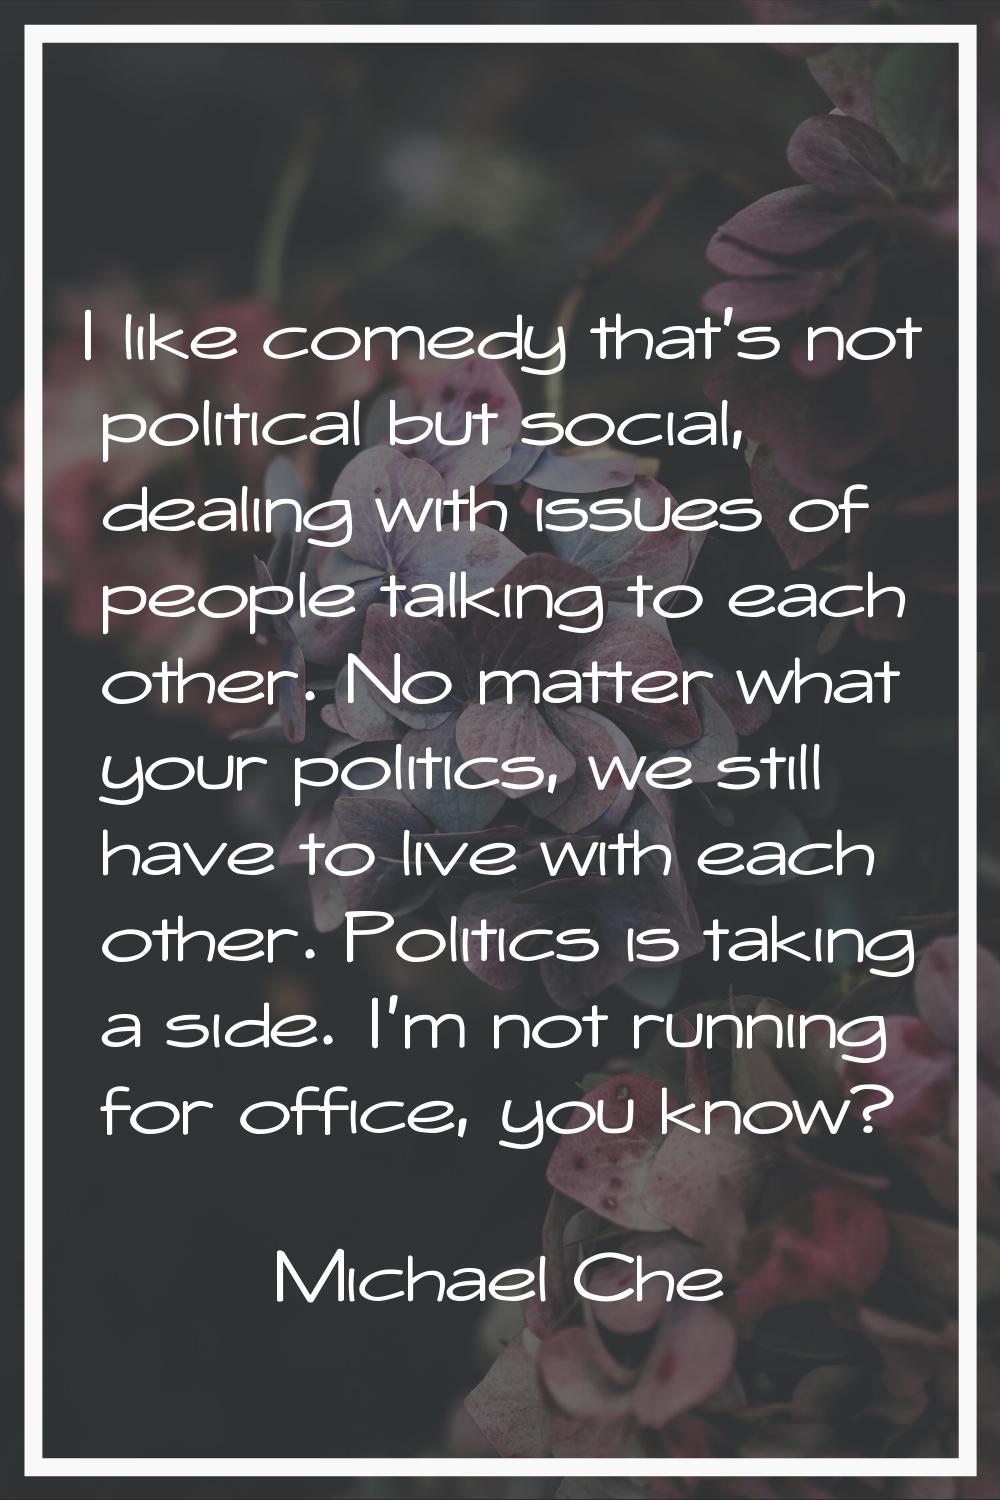 I like comedy that's not political but social, dealing with issues of people talking to each other.